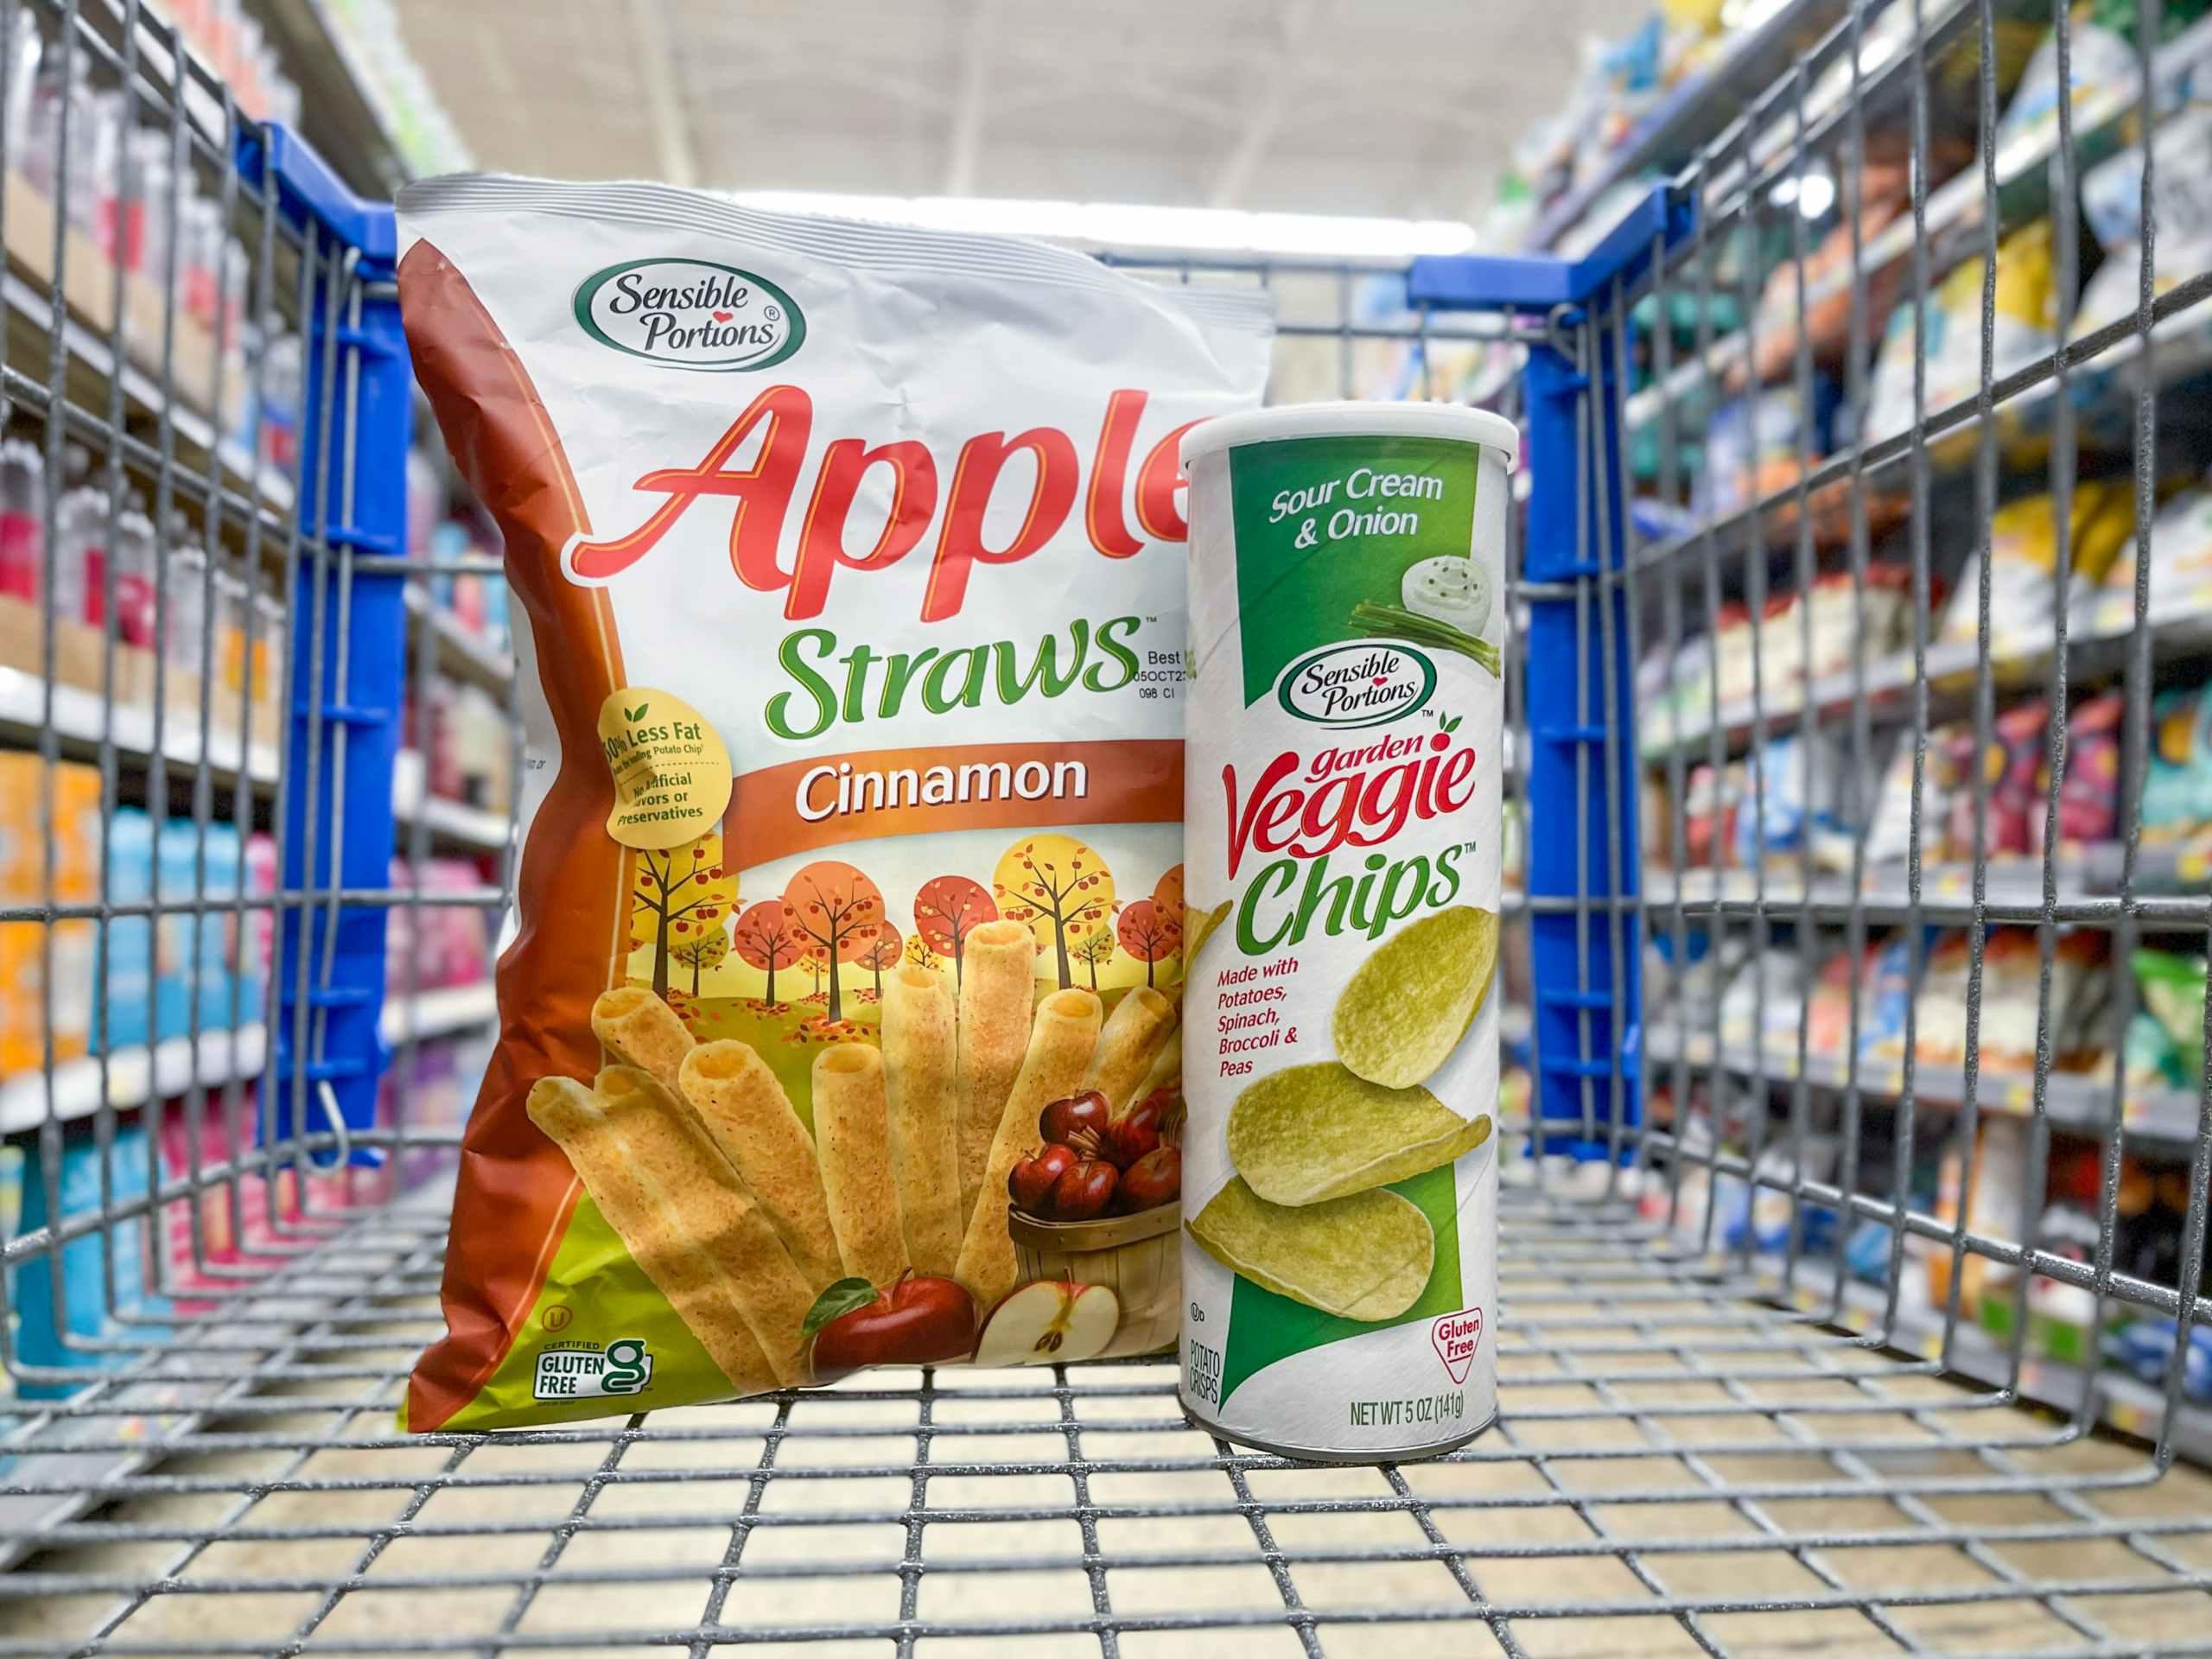 An Apple Straws bag and a Veggie Chips can sitting in a store cart.